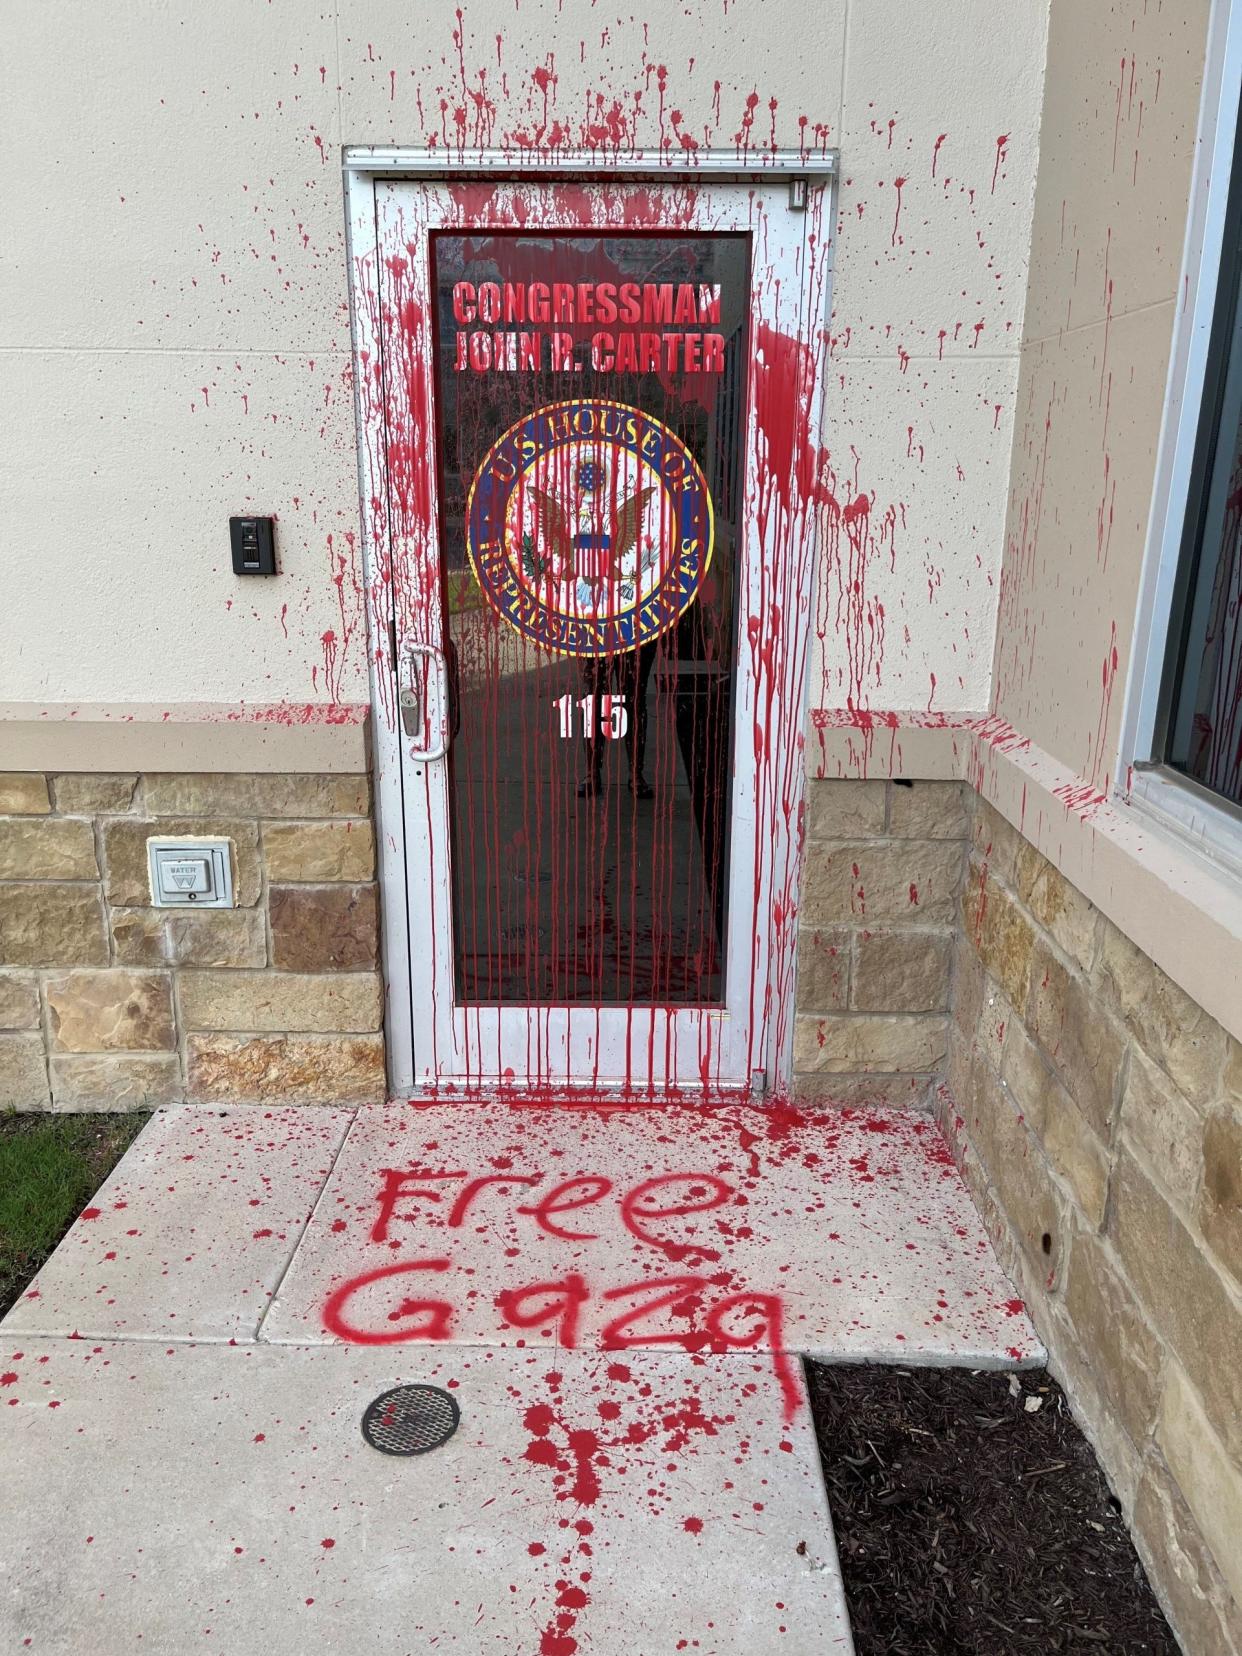 Police are looking for the person who threw red paint on the door and spraypainted 'Free Gaza' outside U.S. Rep. John Carter's office in Georgetown.